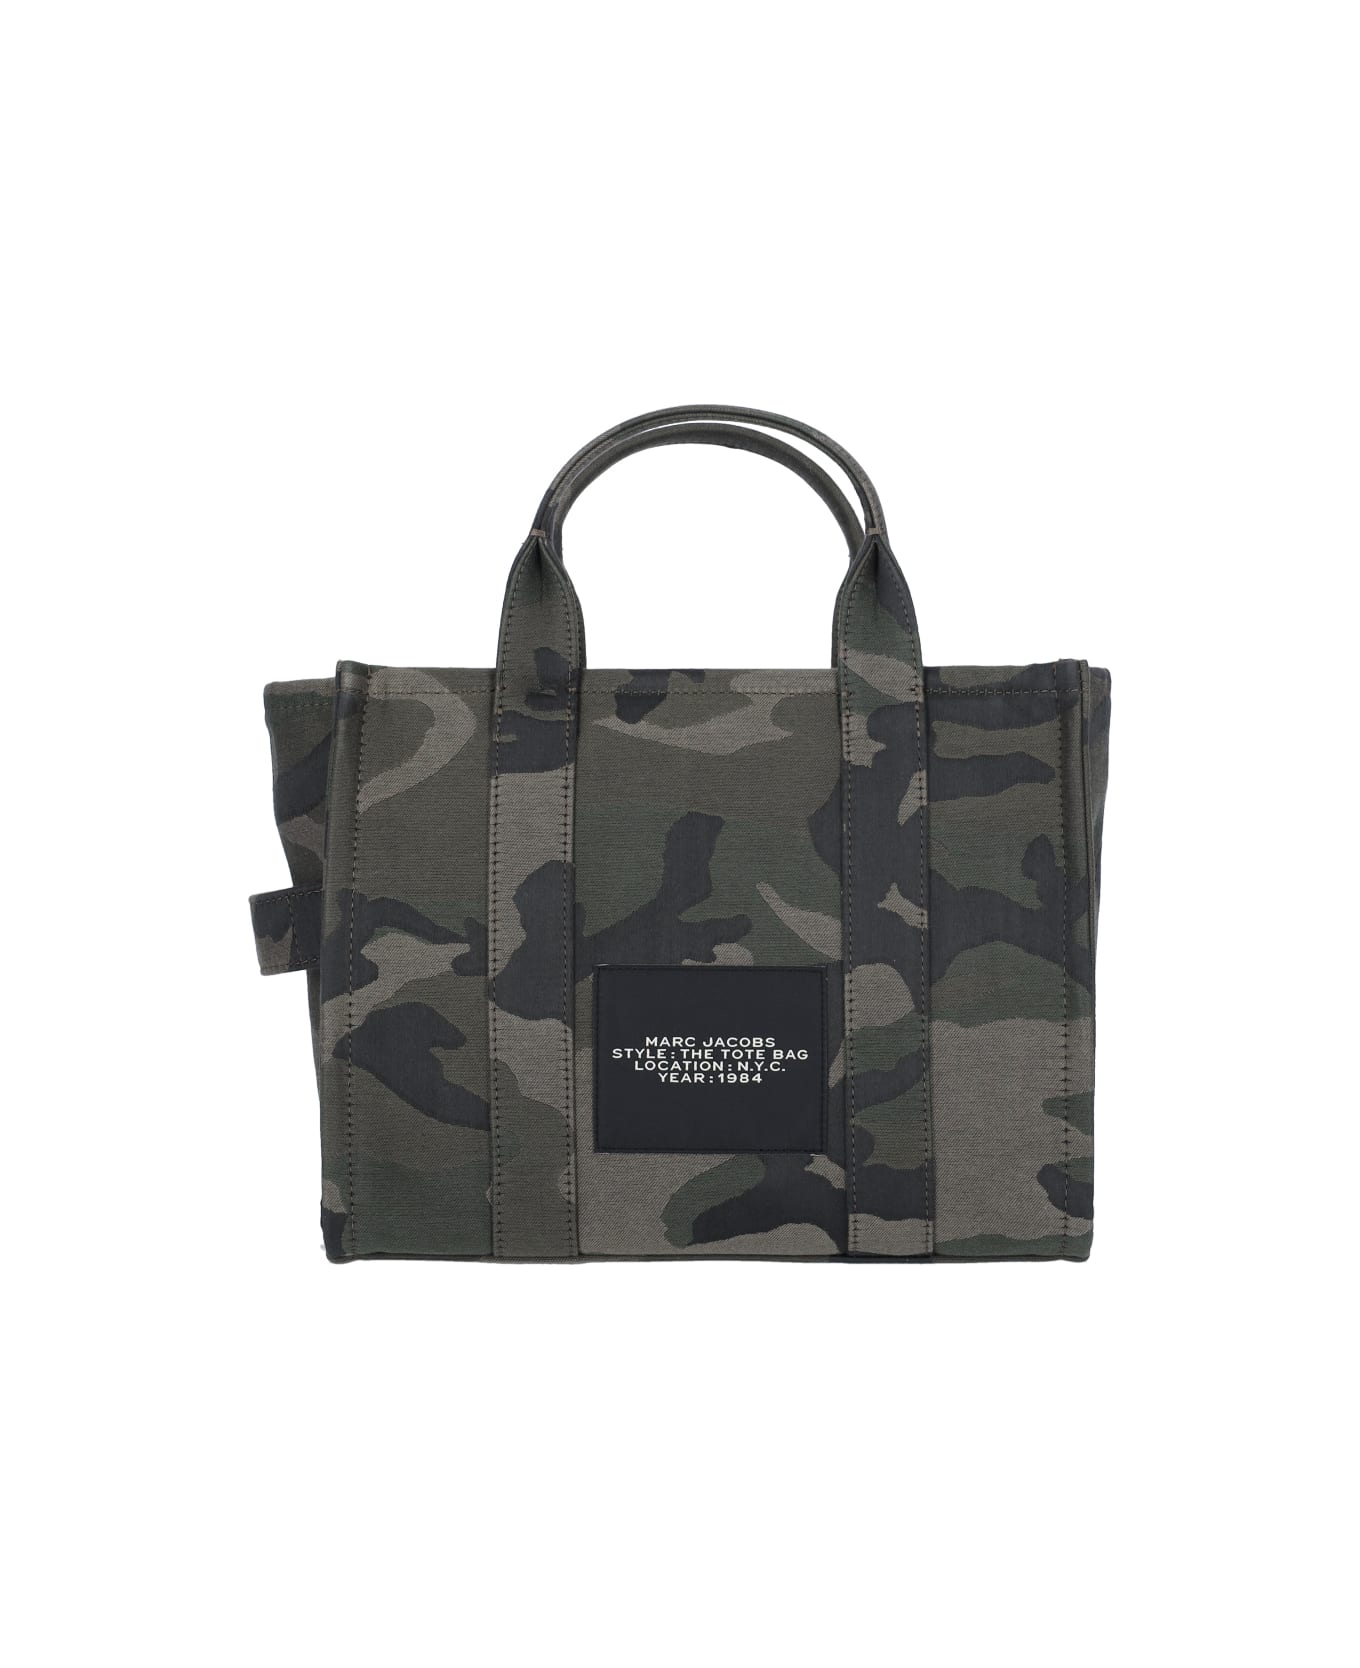 Marc Jacobs Traveler Tote In Camouflage Cotton - Green